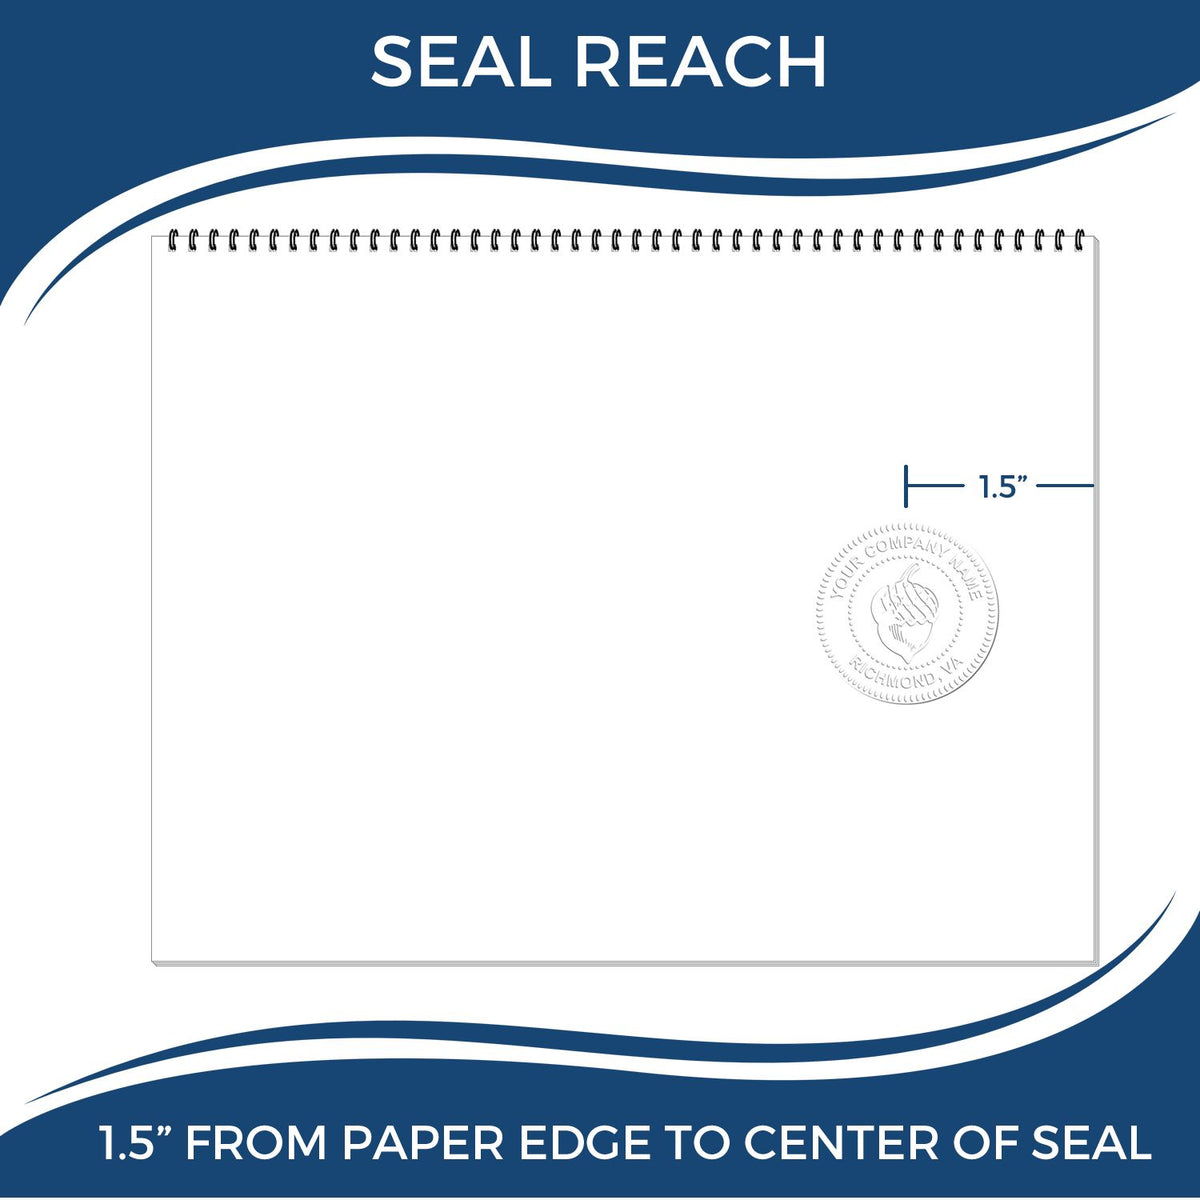 An infographic showing the seal reach which is represented by a ruler and a miniature seal image of the Soft Kansas Professional Geologist Seal